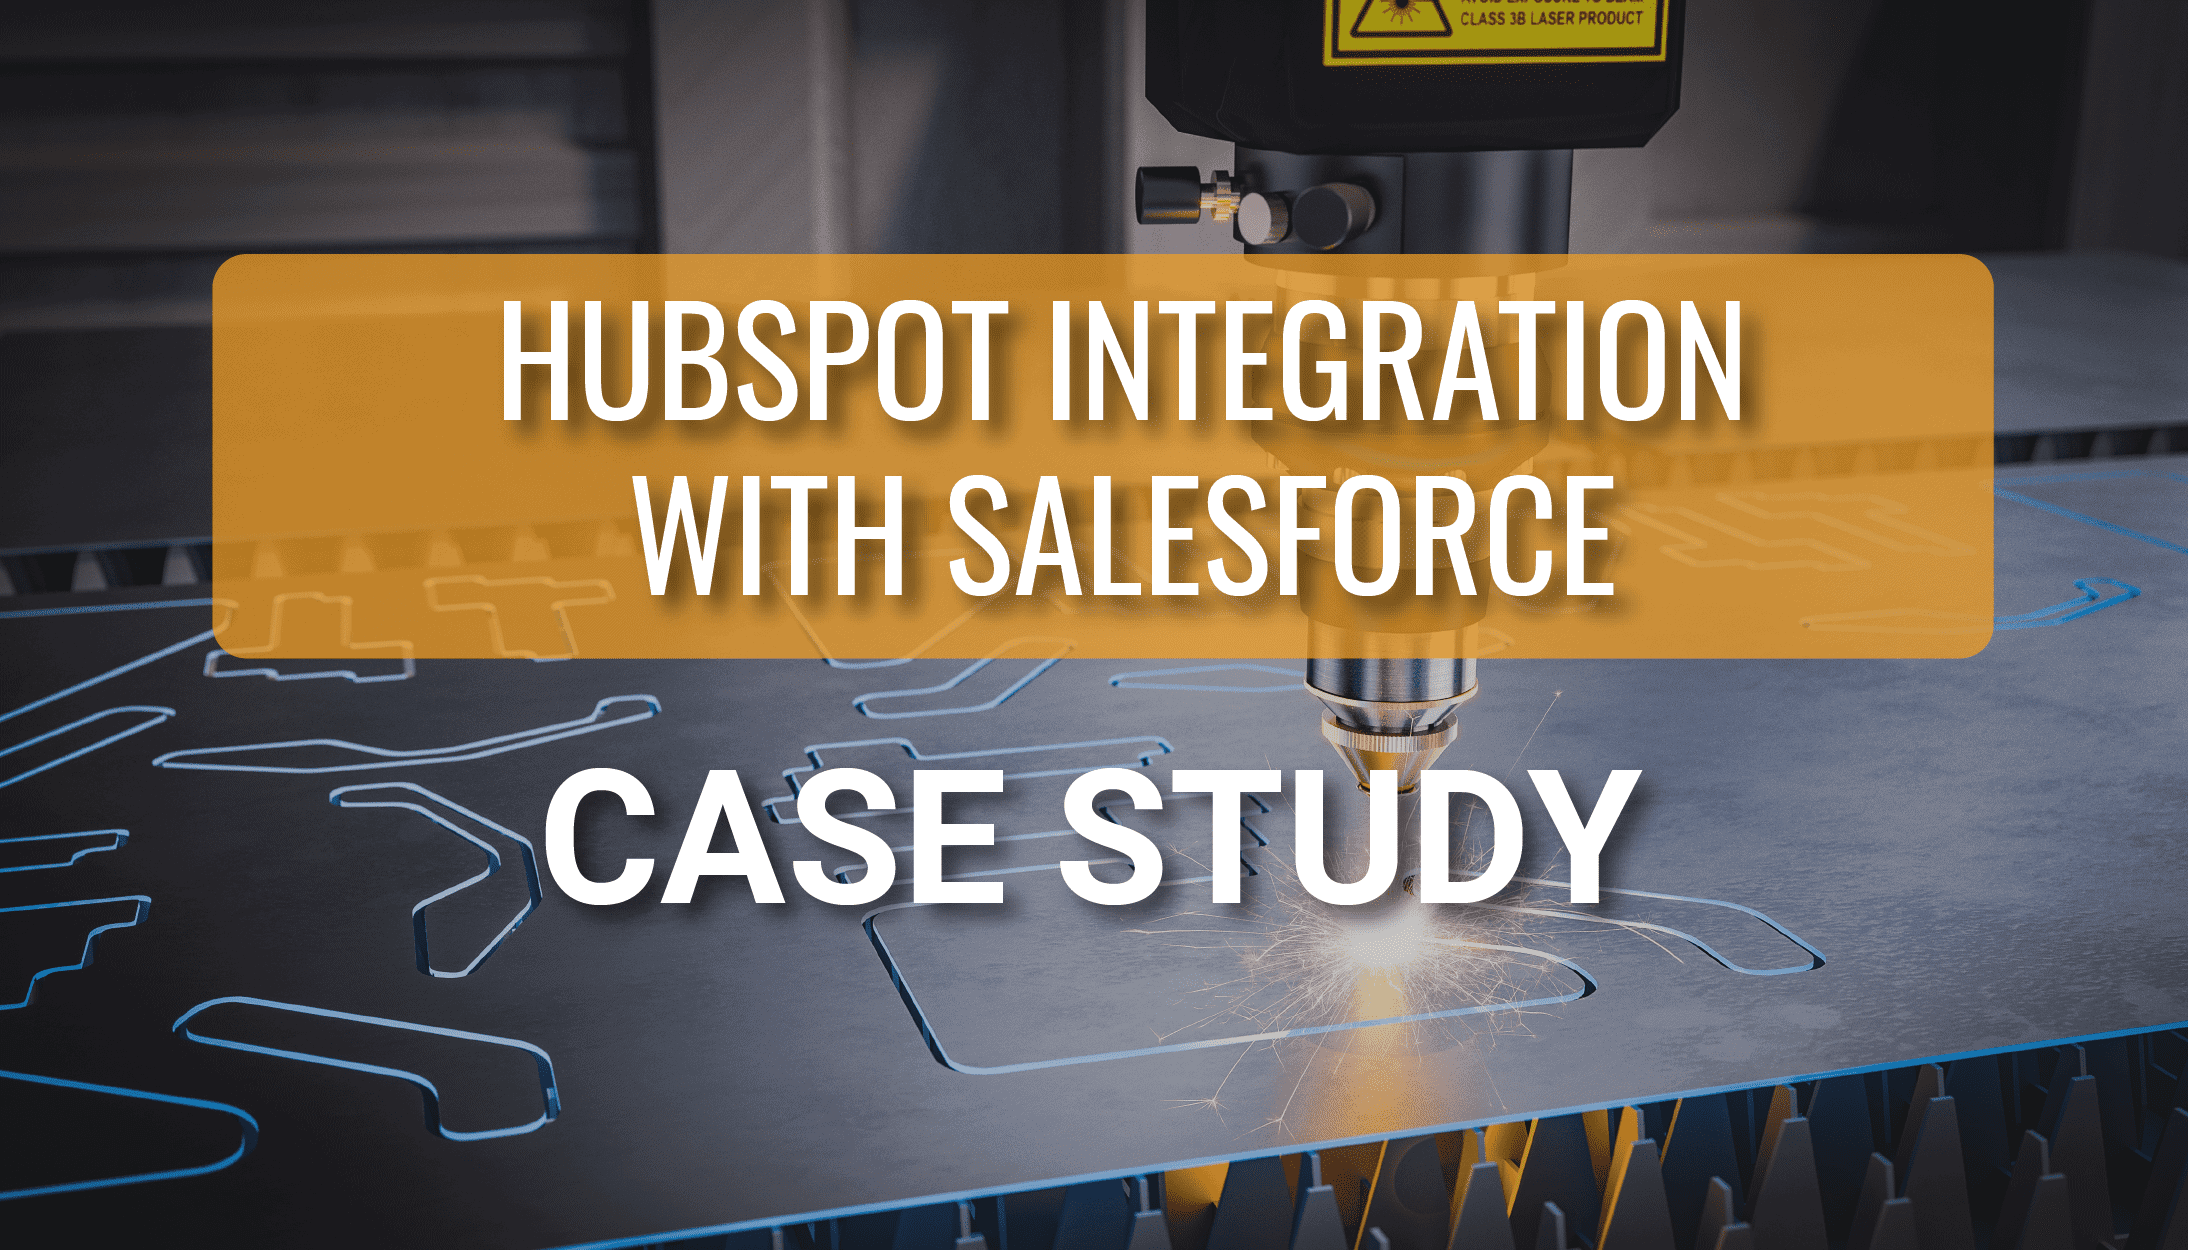 HubSpot integration for medical device company